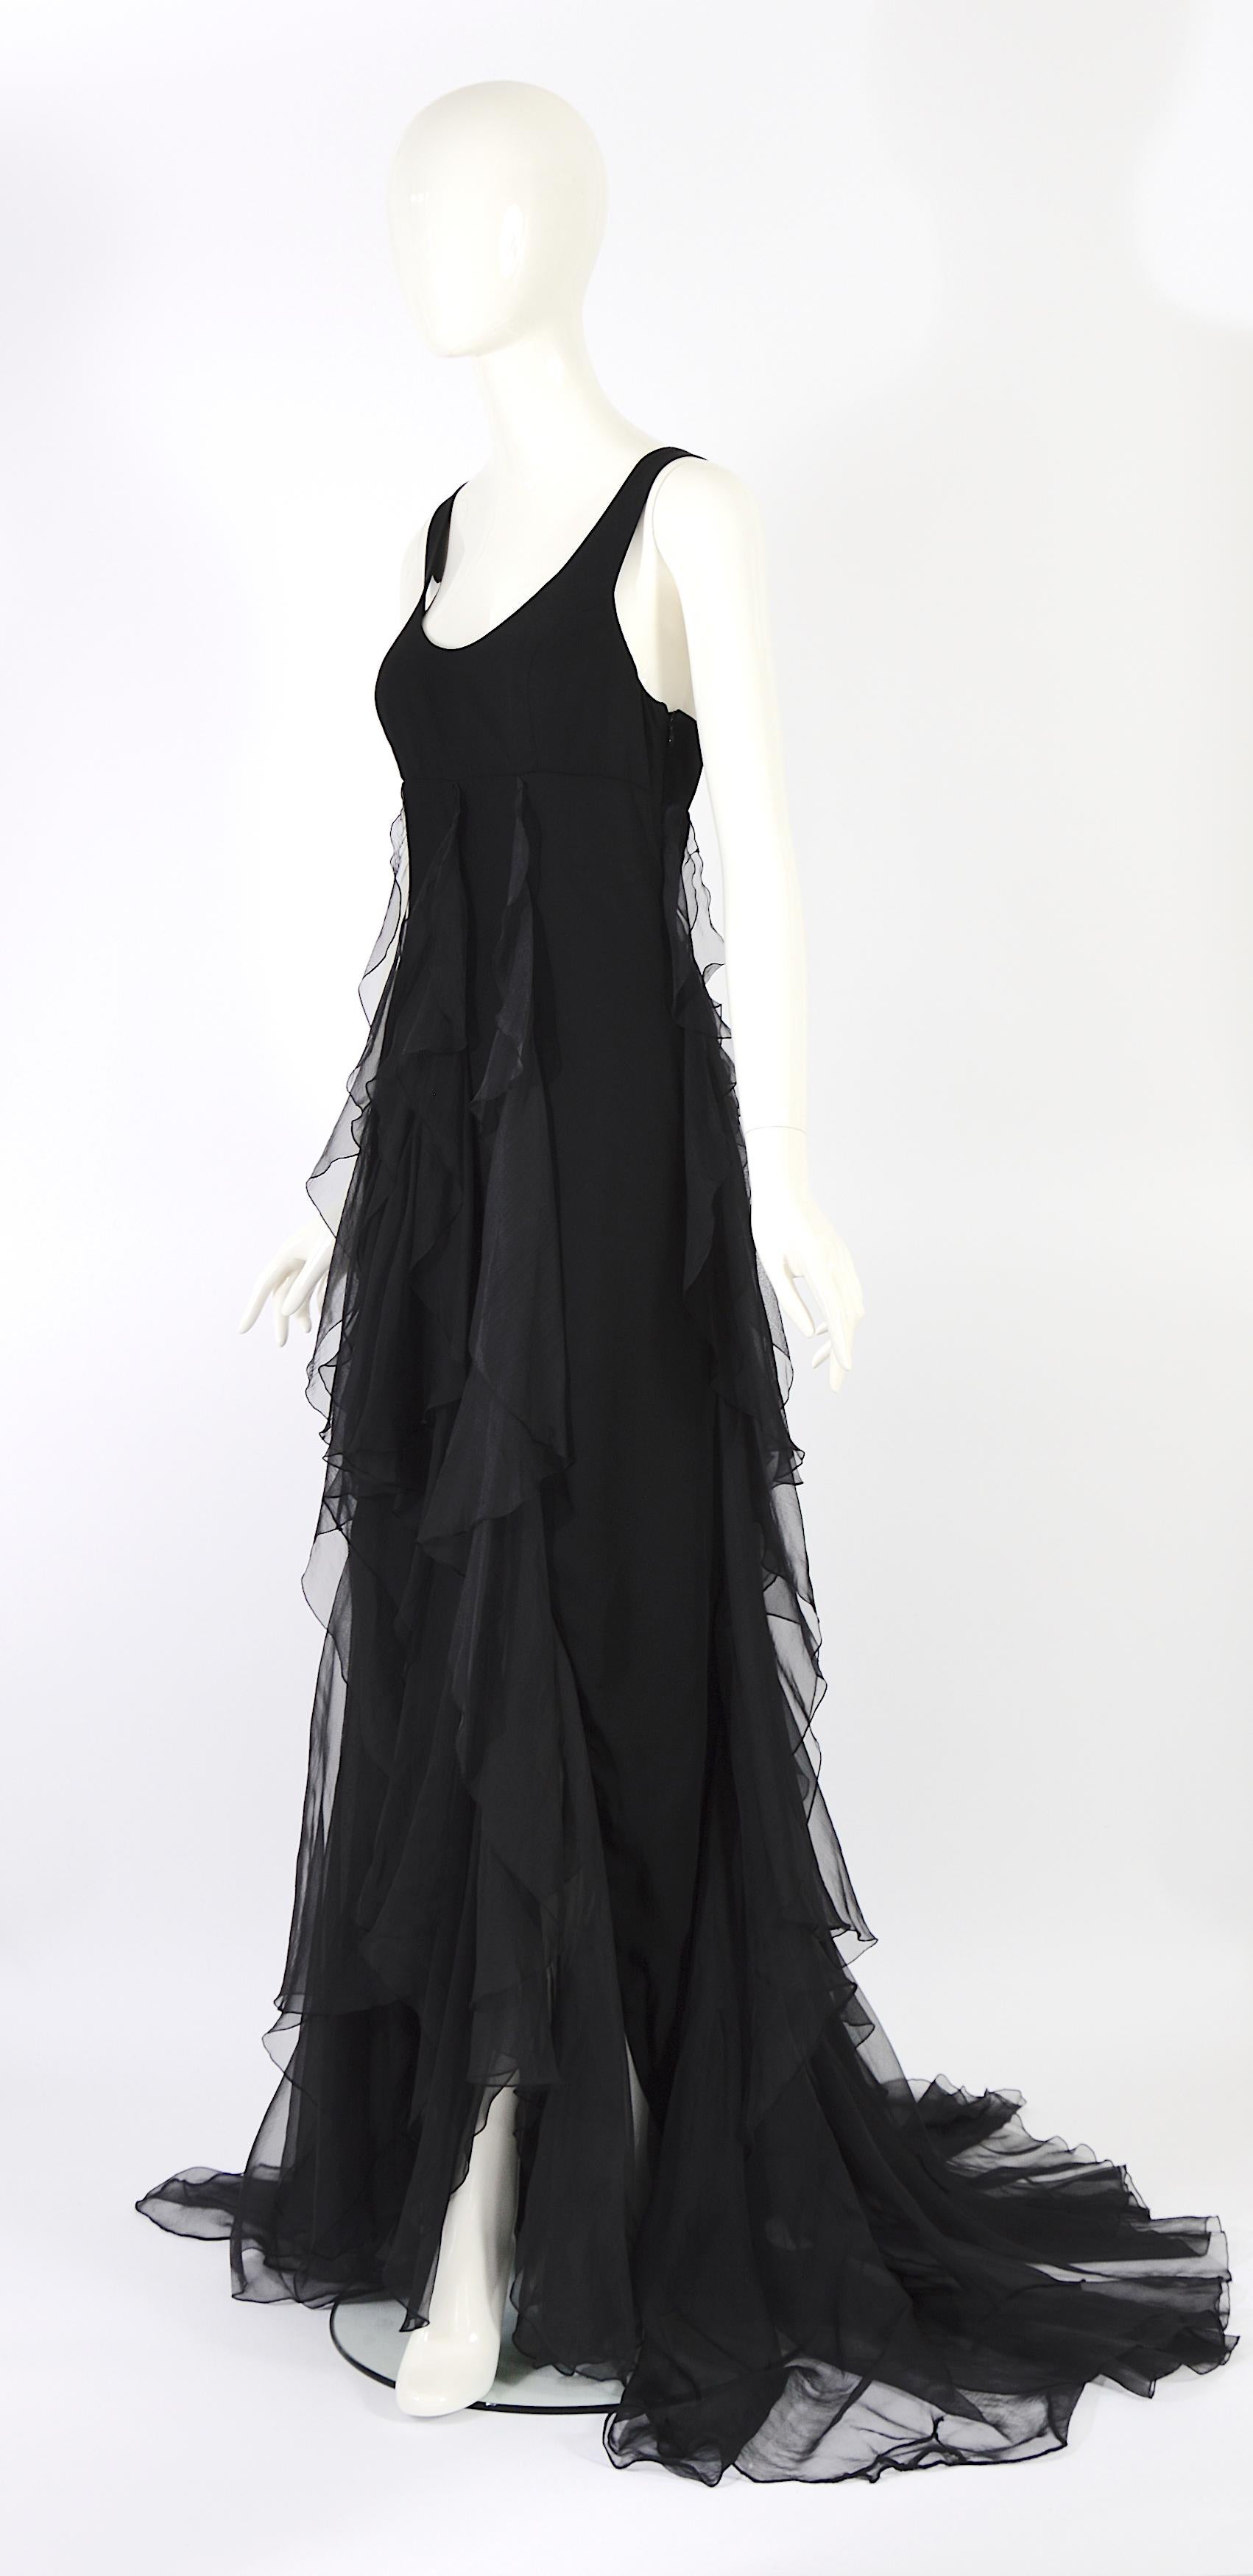 Christian Dior by Gianfranco Ferre S/S 1994 vintage black silk evening dress In Good Condition For Sale In Antwerpen, Vlaams Gewest